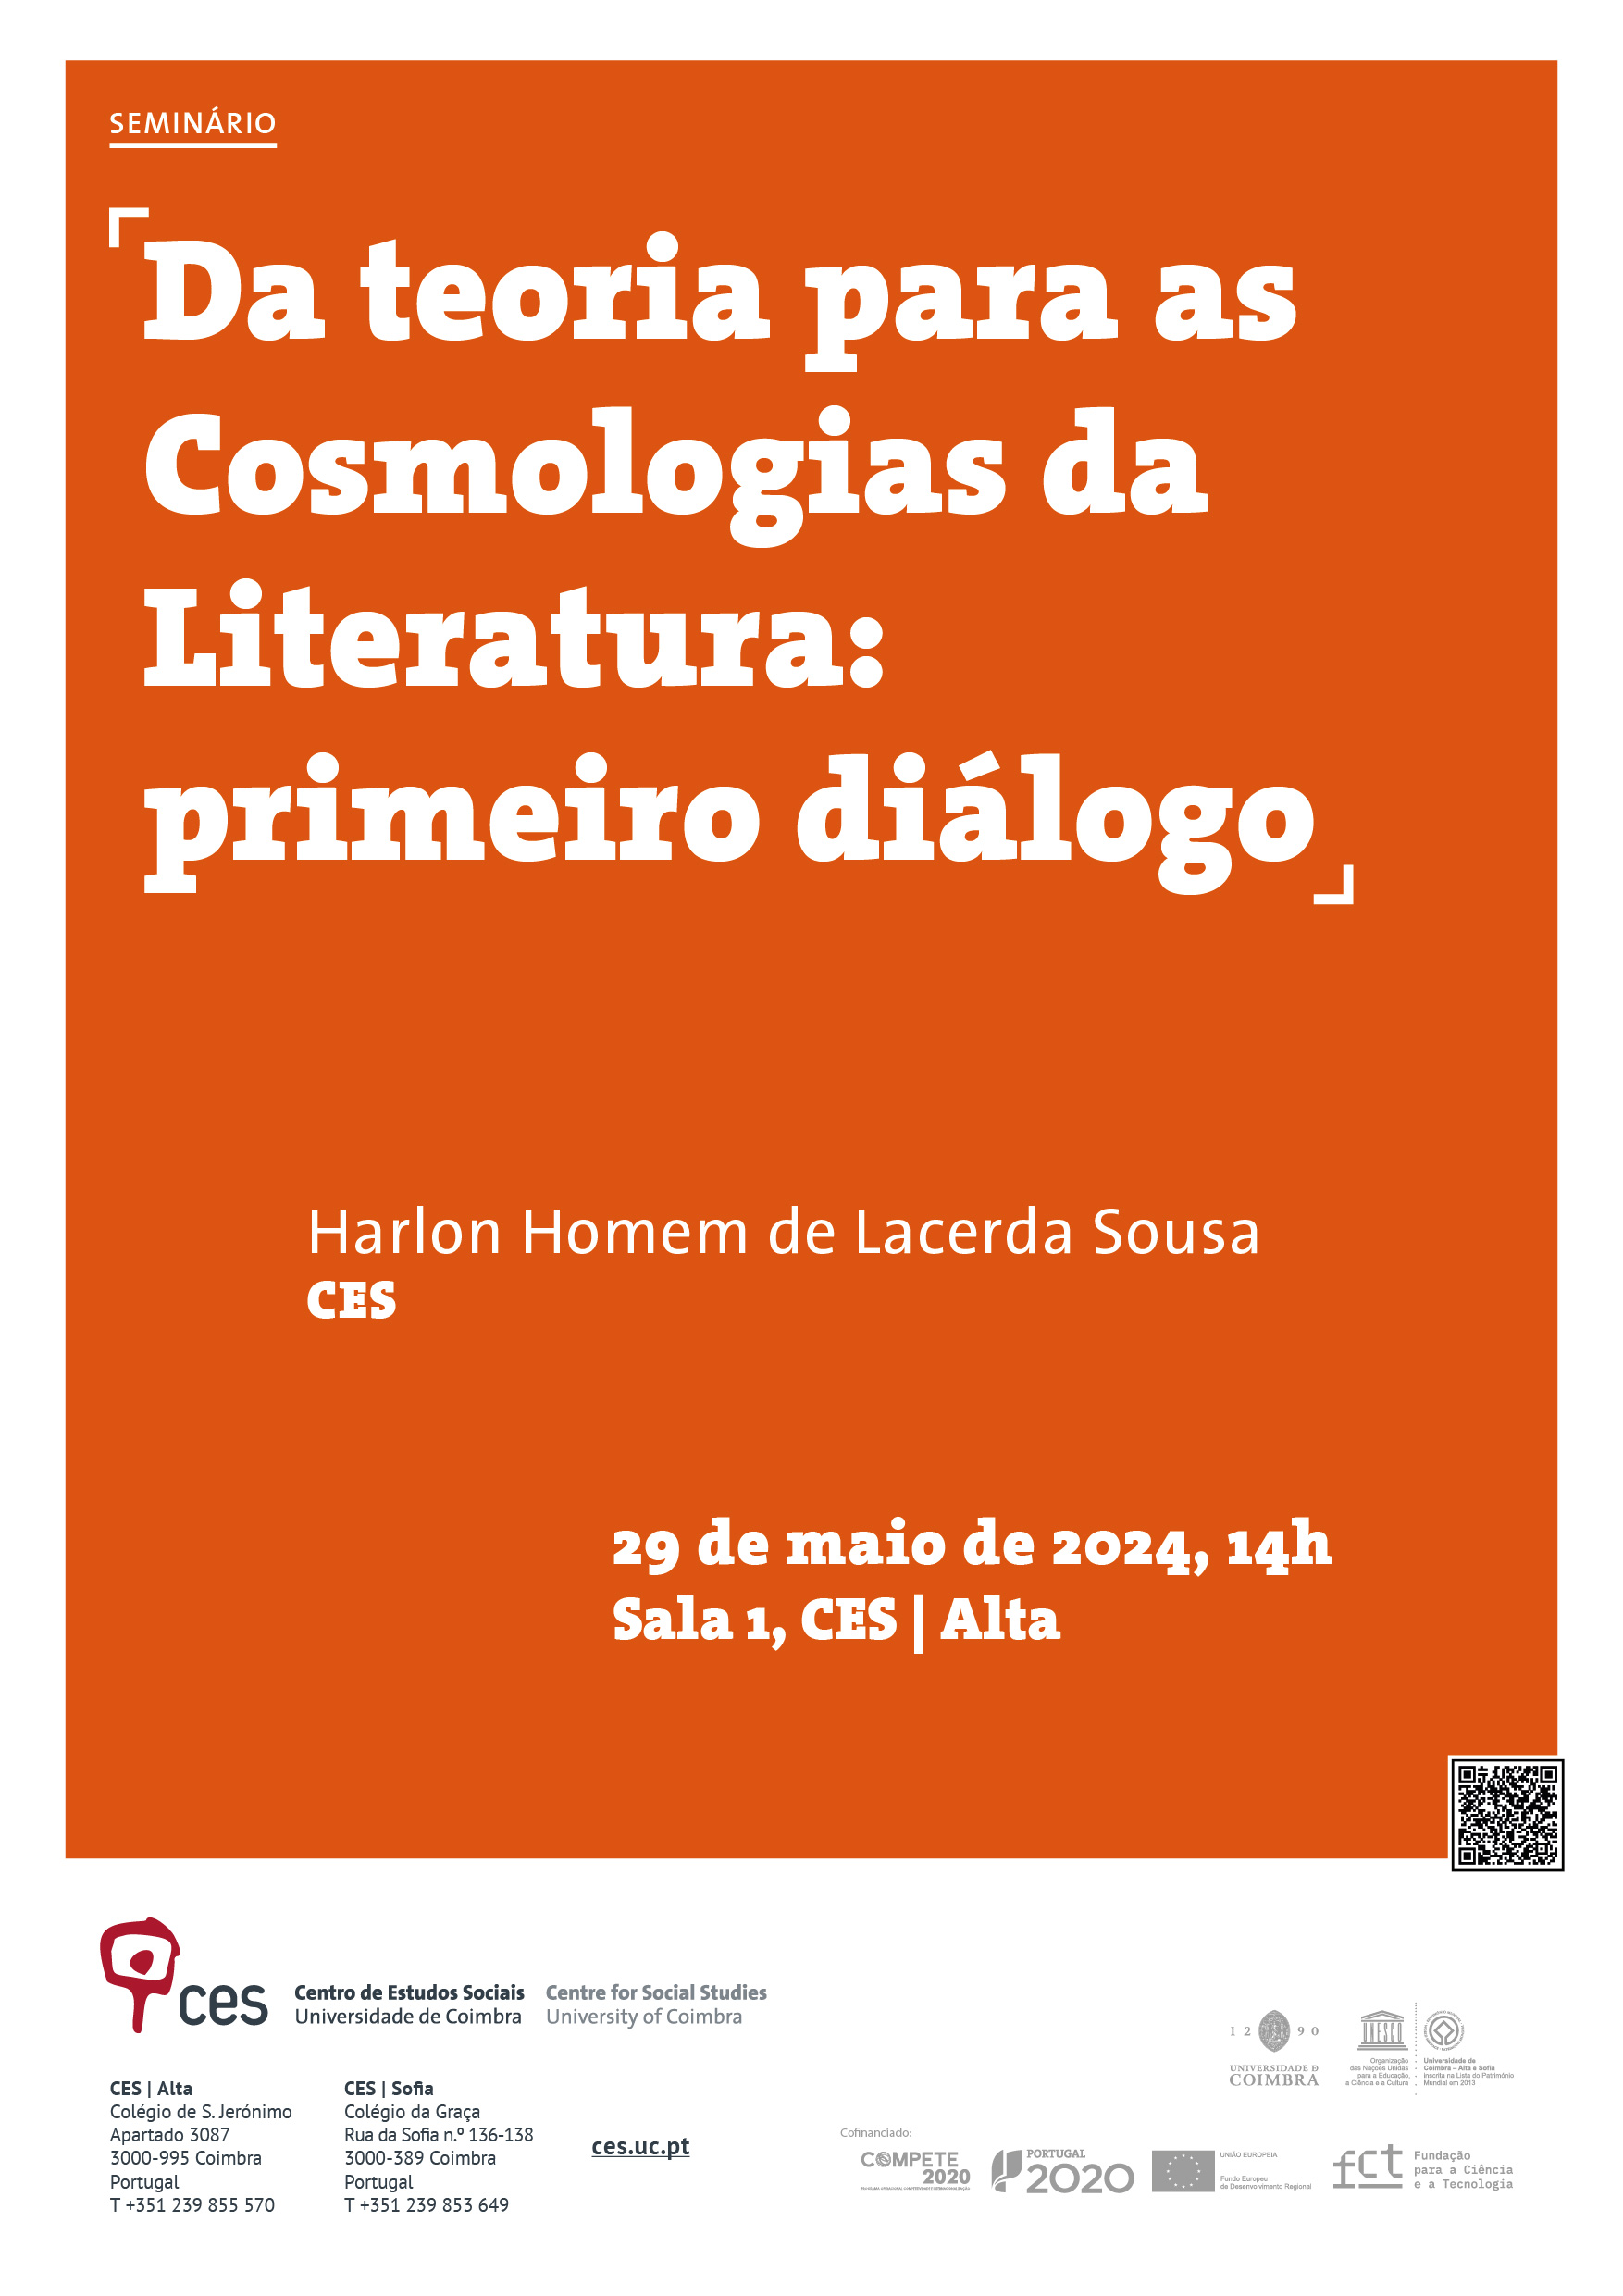 From theory to Cosmologies of Literature: first dialogue <span id="edit_45557"><script>$(function() { $('#edit_45557').load( "/myces/user/editobj.php?tipo=evento&id=45557" ); });</script></span>